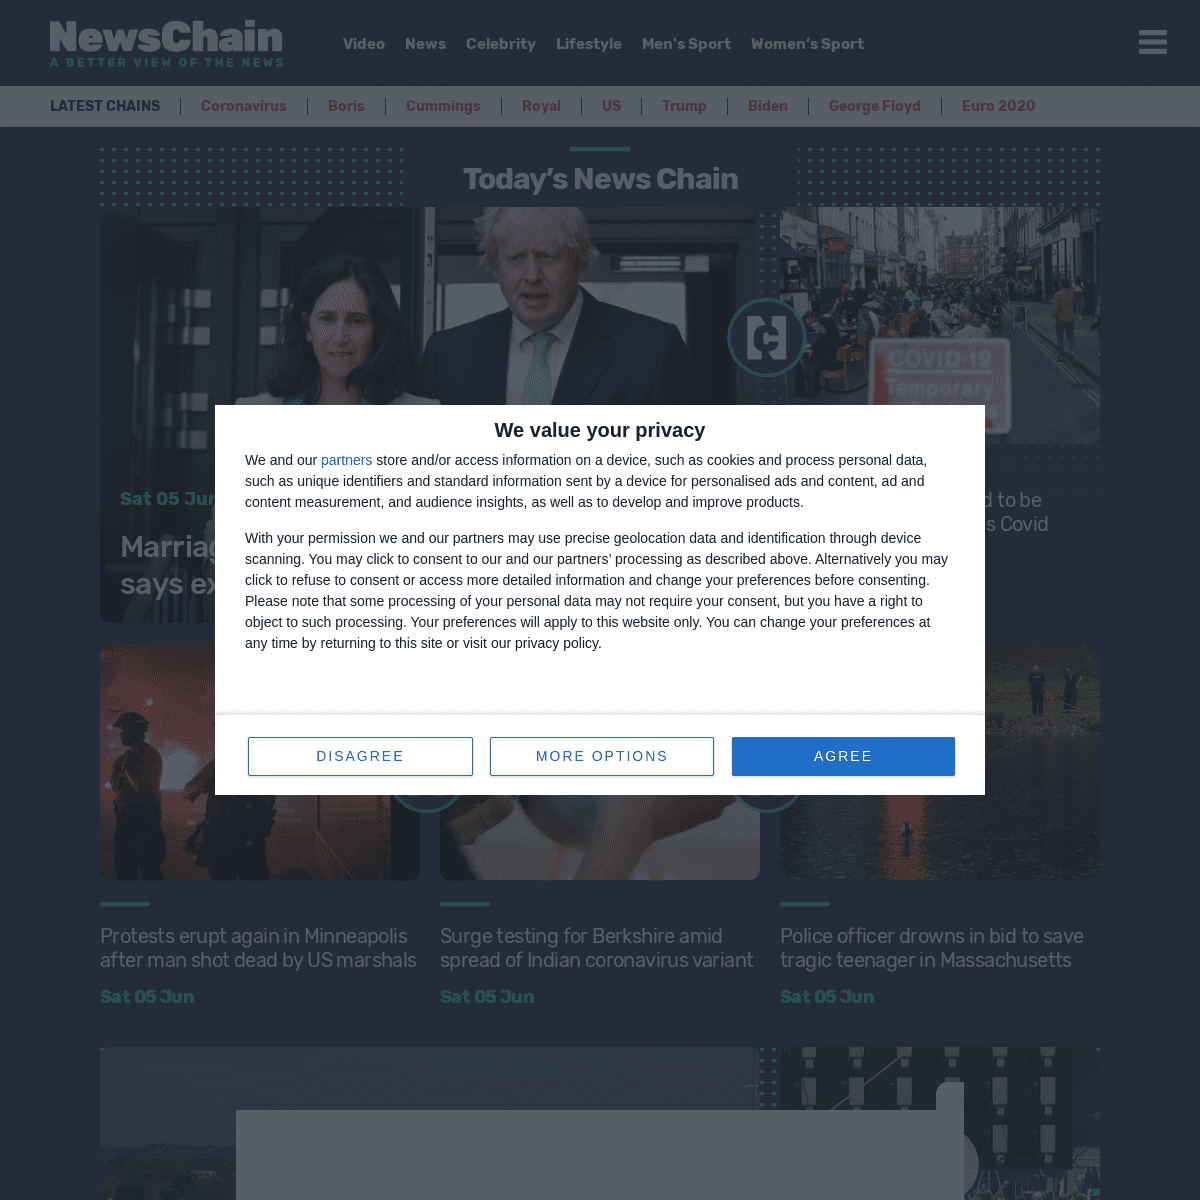 A complete backup of https://newschain.uk